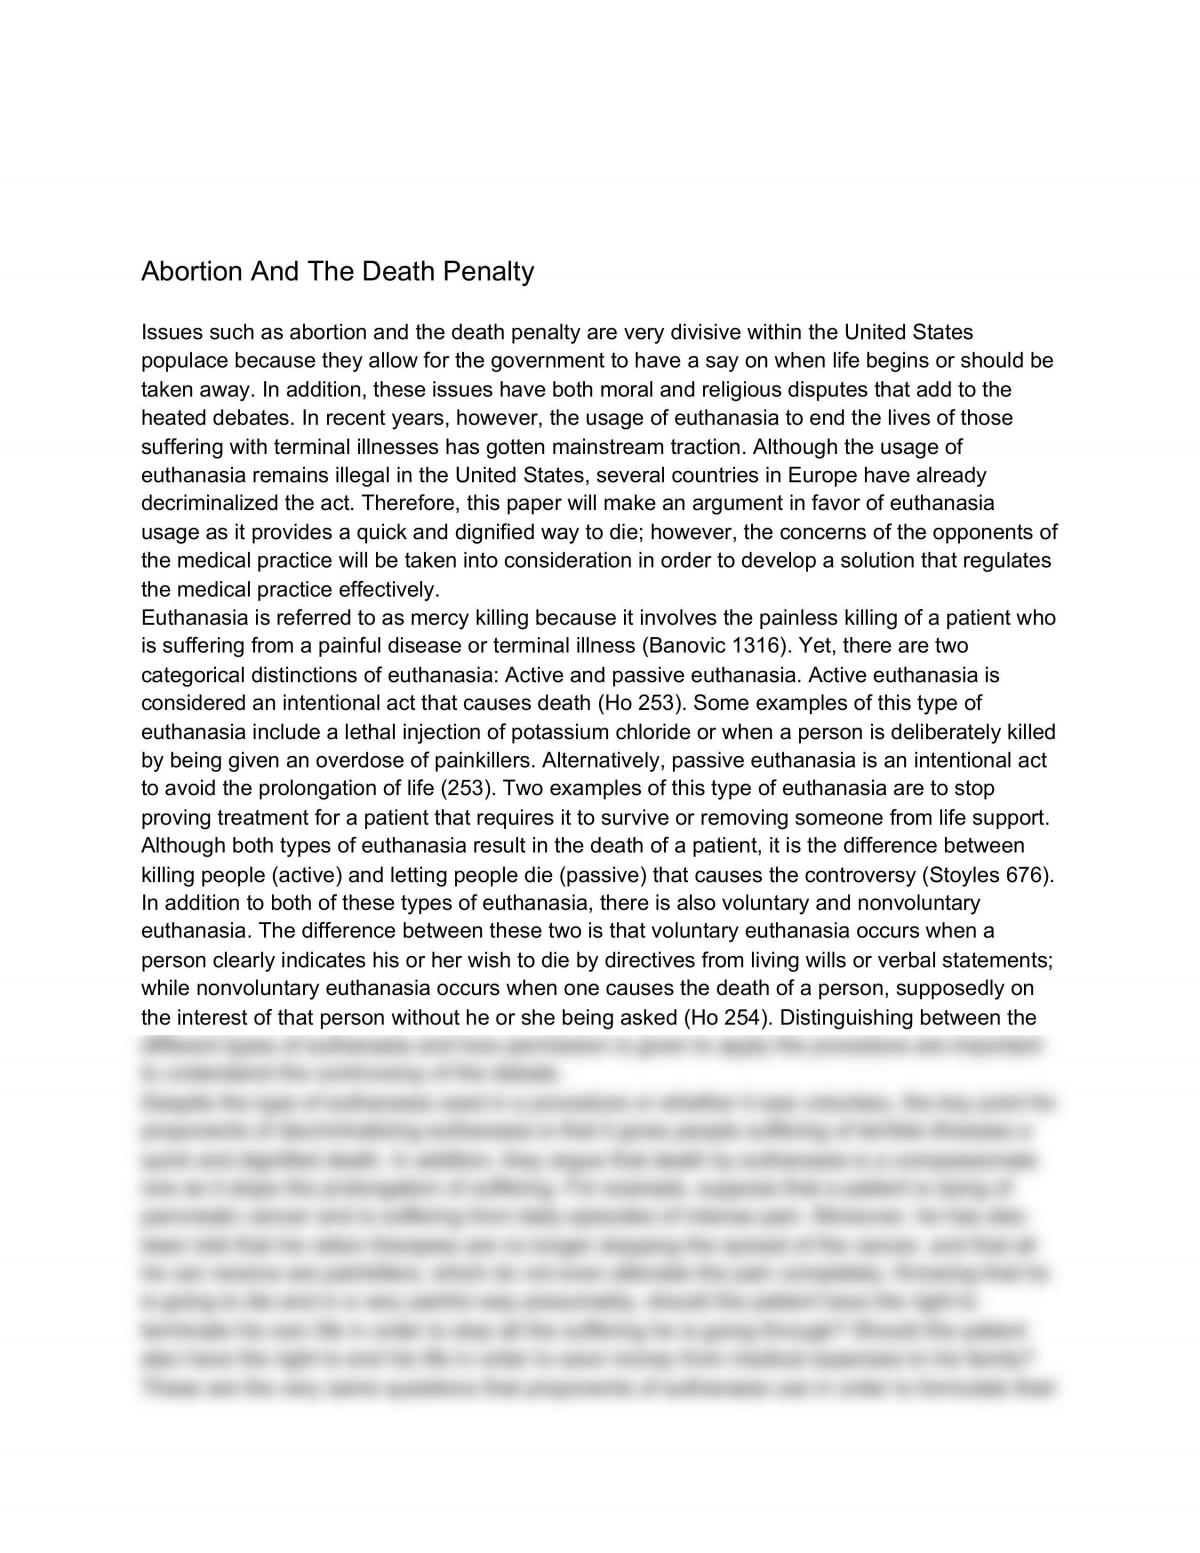 U.S.A's Abortion and Death penalty - Page 1